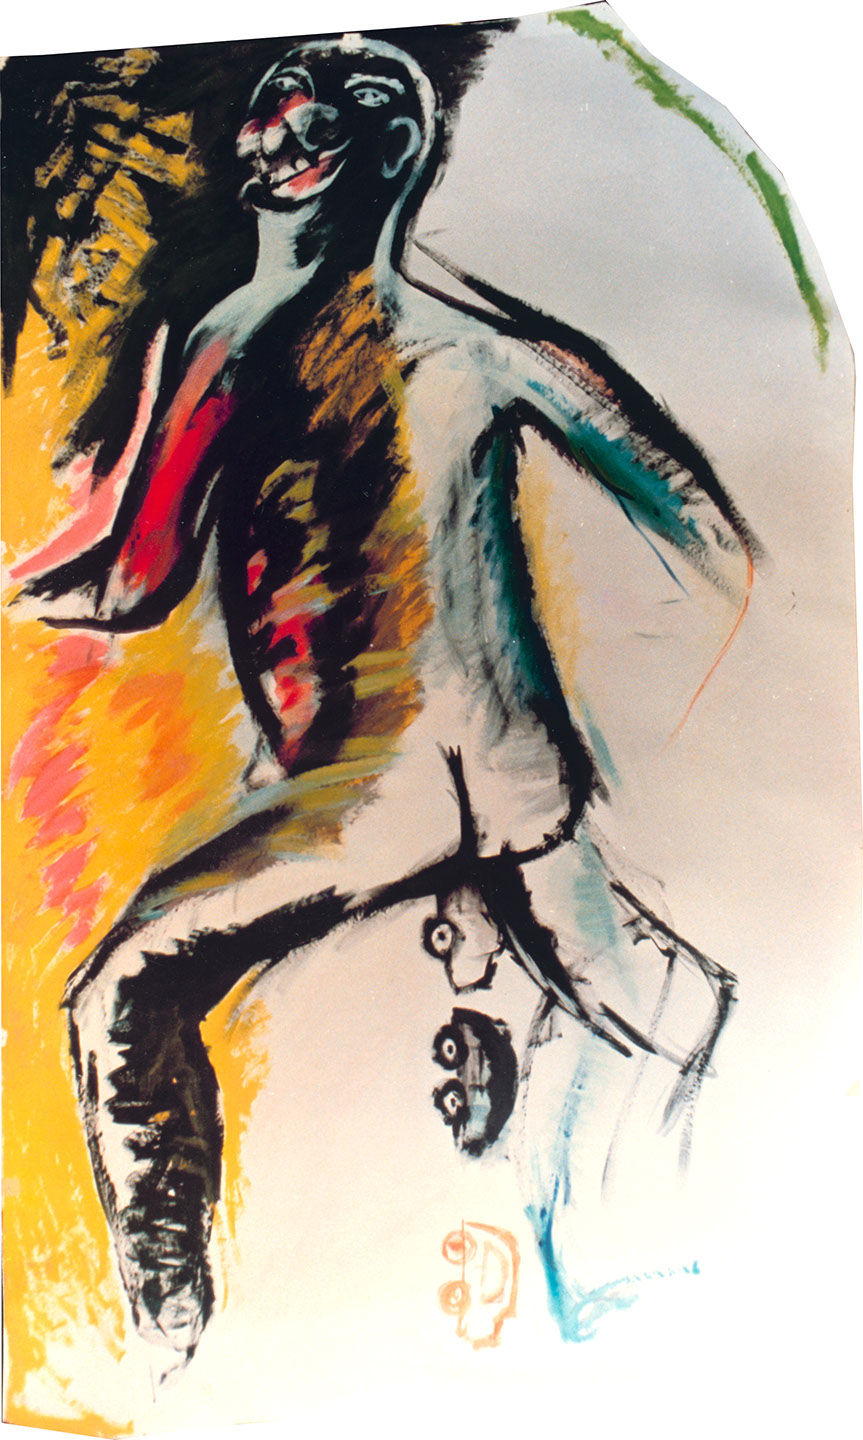 Title: Defecating
Materials: Acrylic on paper
Size: 240x150 cm
Year: 1986